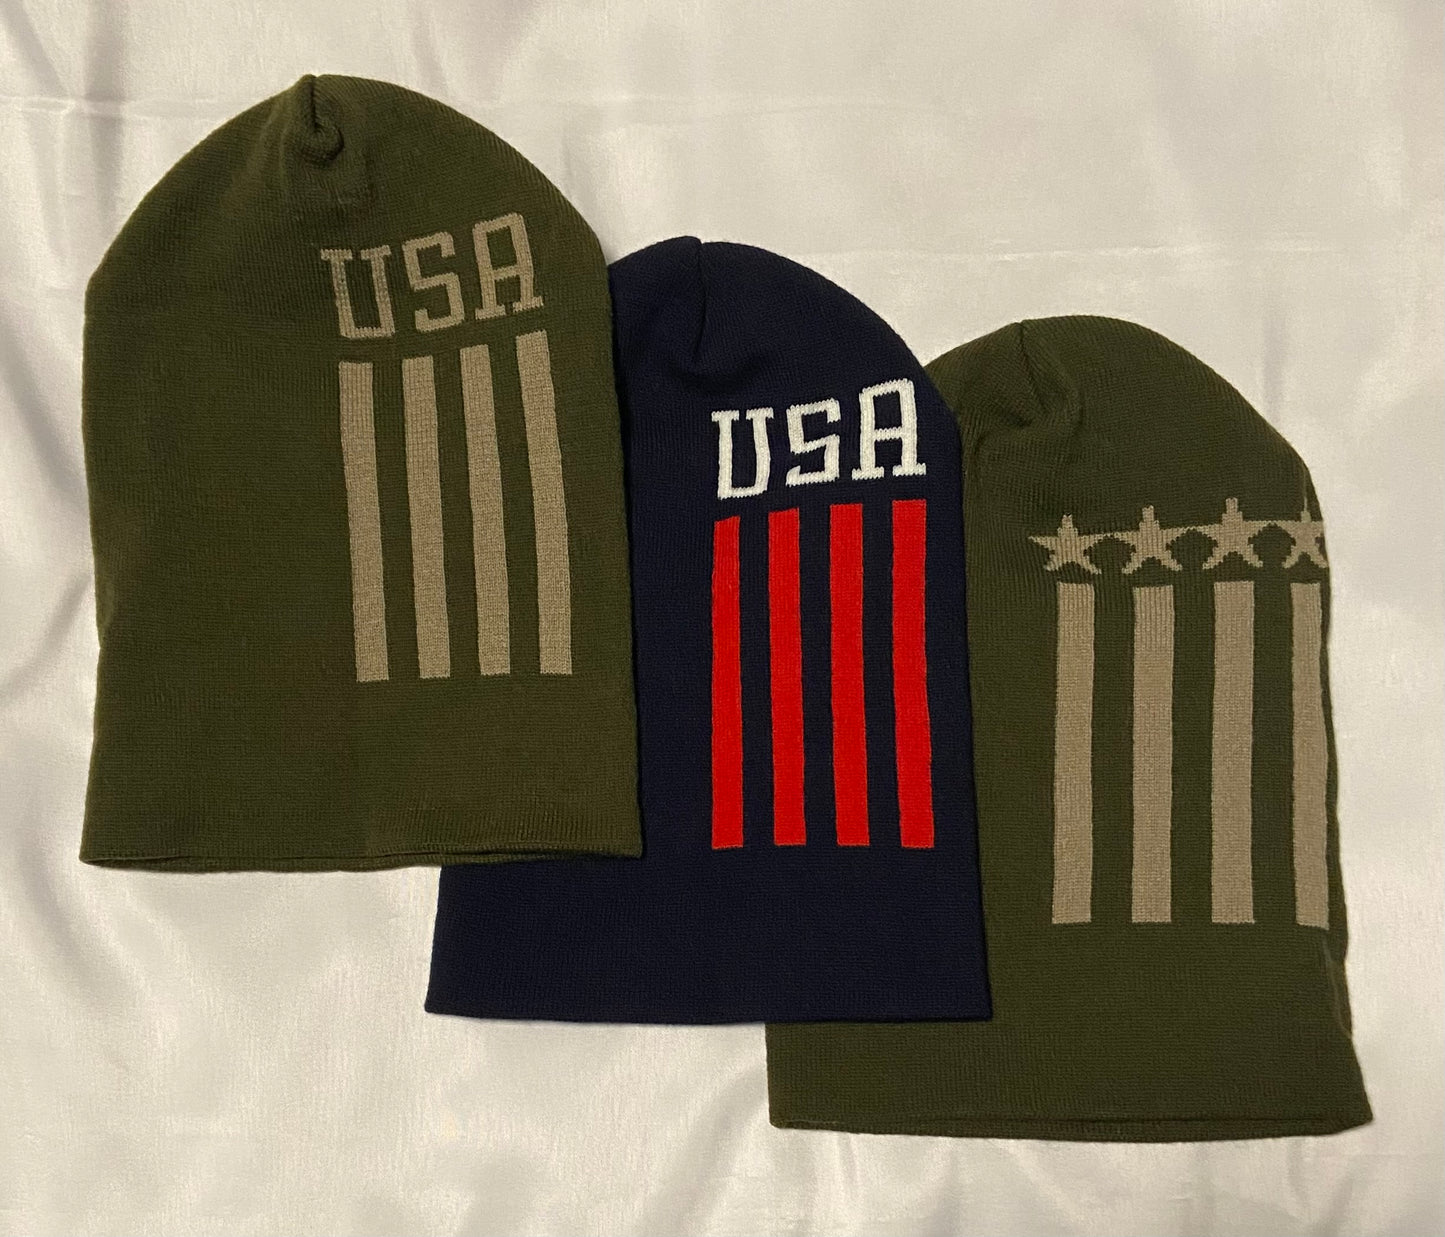 USA Beanies - America Winter Hat- Red White Blue Military Green - 3 styles